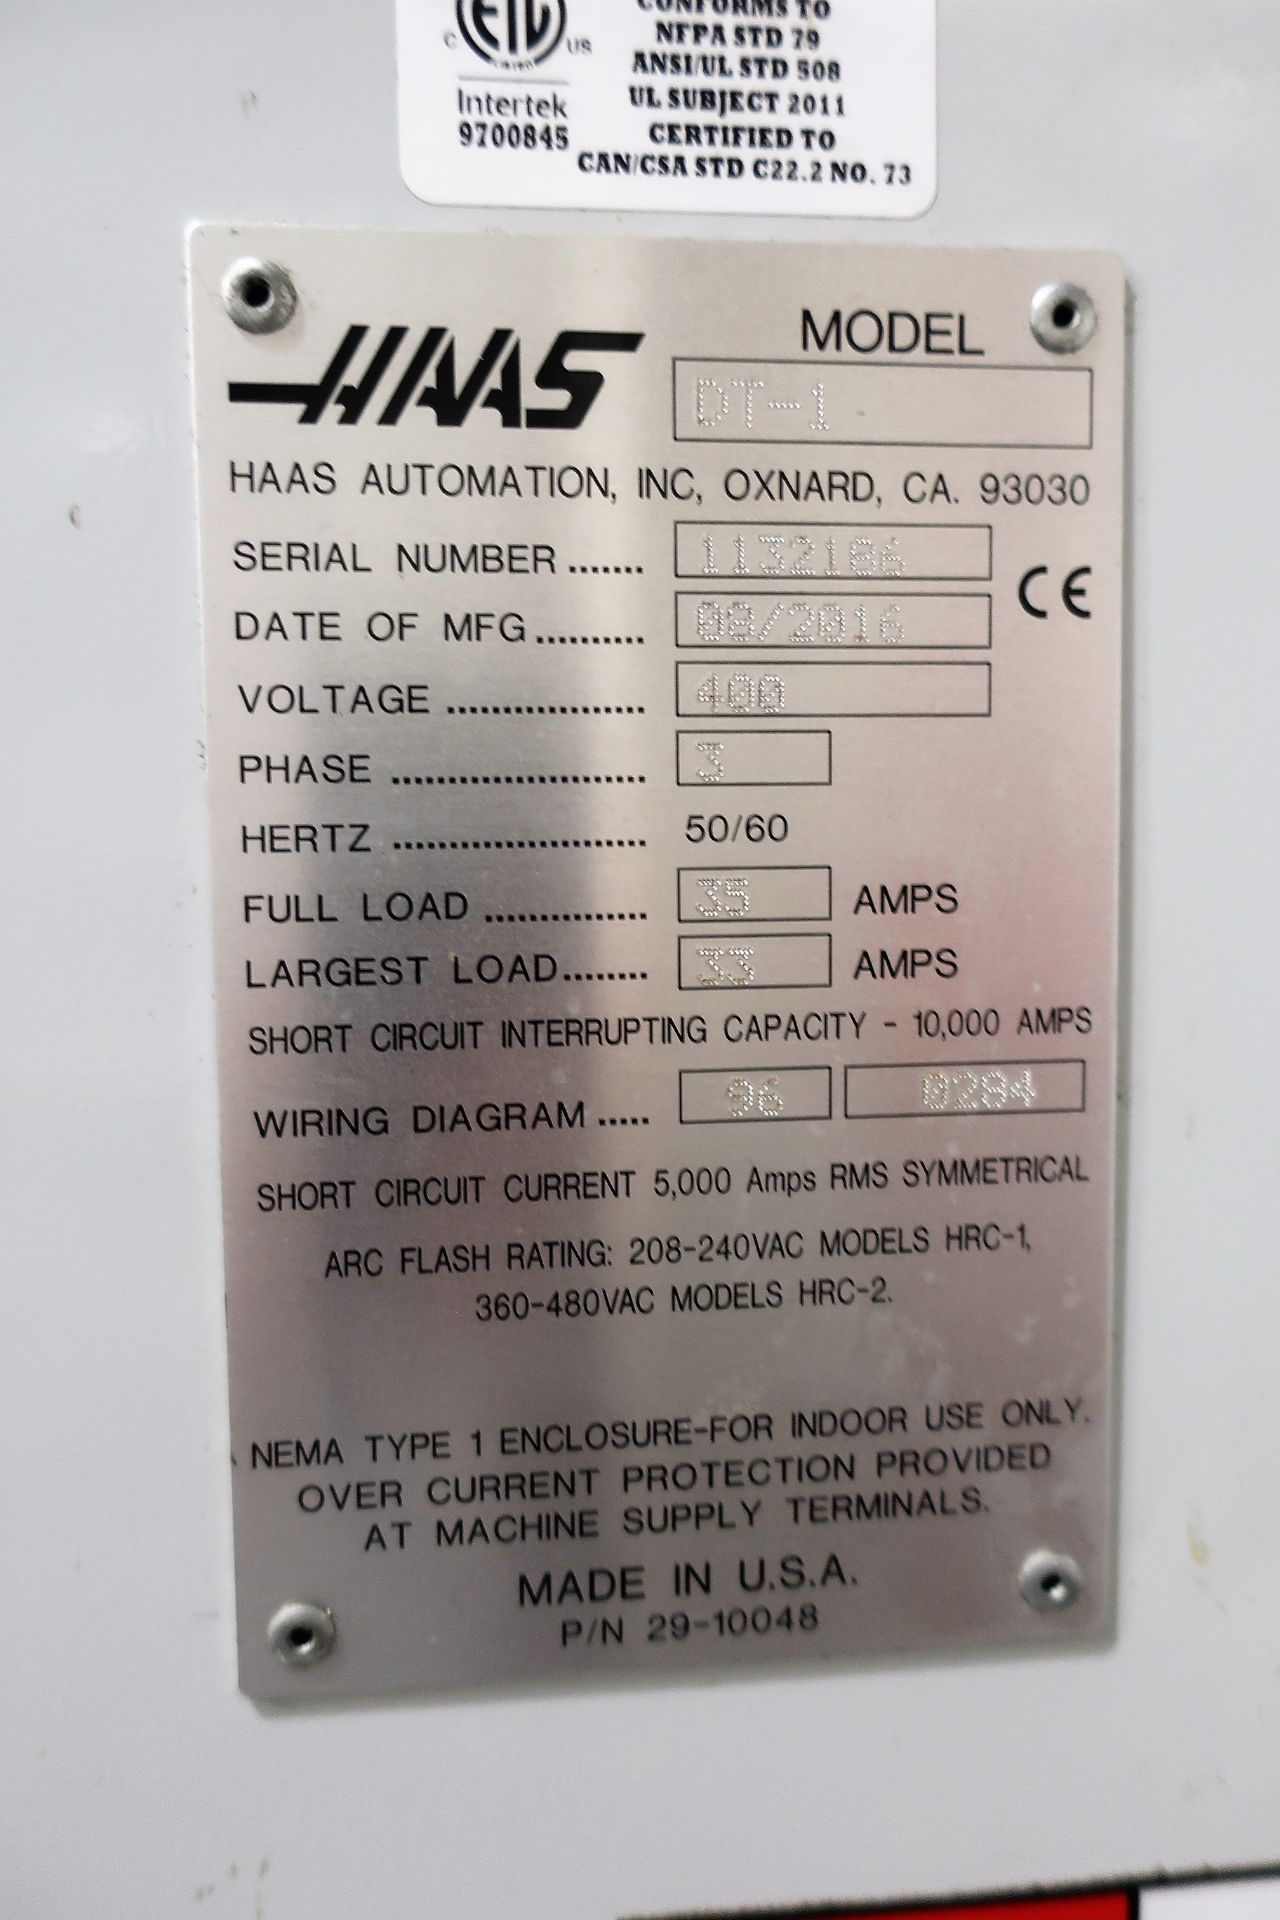 HAAS DT-1 4-AXIS CNC DRILL/TAP/VERTICAL MACHINING CENTER, S/N 1132186, New 2016 - Image 10 of 10